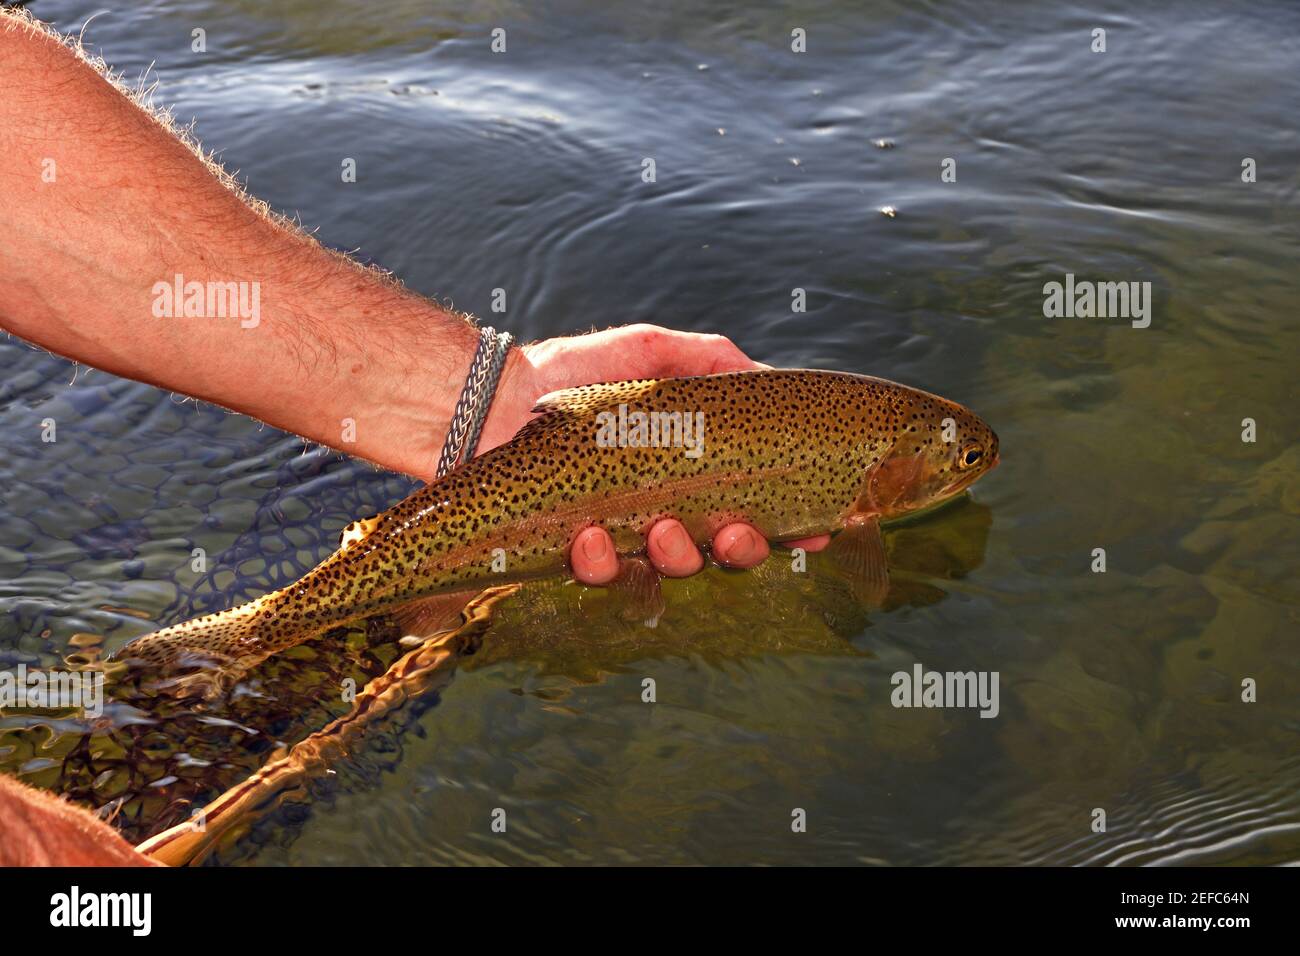 Tim Linehan  releases a cutthroat trout back into the Kootenai River in summer. Lincoln County, northwest Montana. (Photo by Randy Beacham) Stock Photo